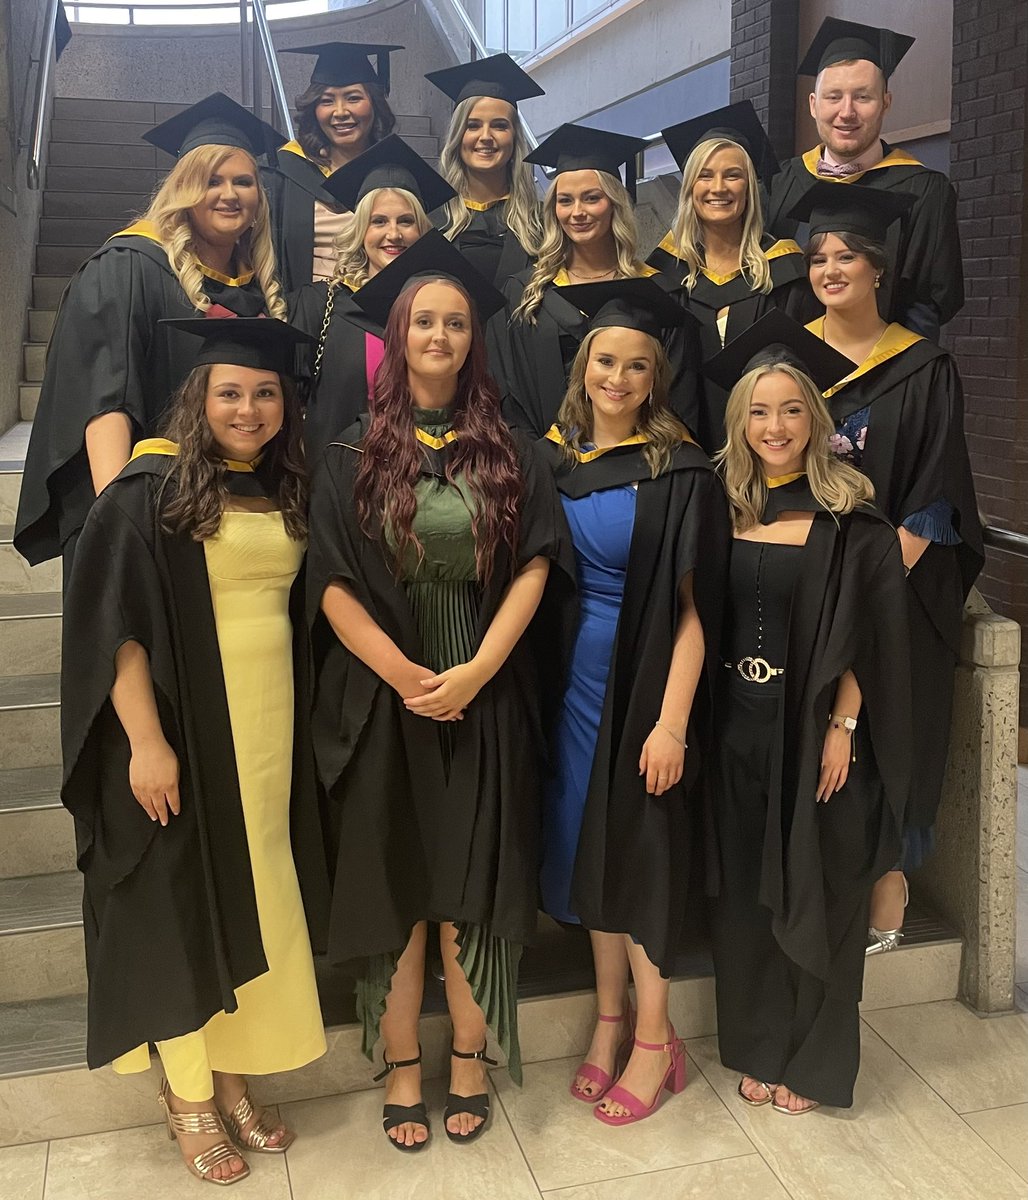 Congratulations to our graduating classes from The Department of Nursing and Midwifery 🎓 

Wishing you all the best with future endeavours ⭐️ 

#StudyAtUL #UL #ULGraduation #Graduation #StudentLife #Limerick